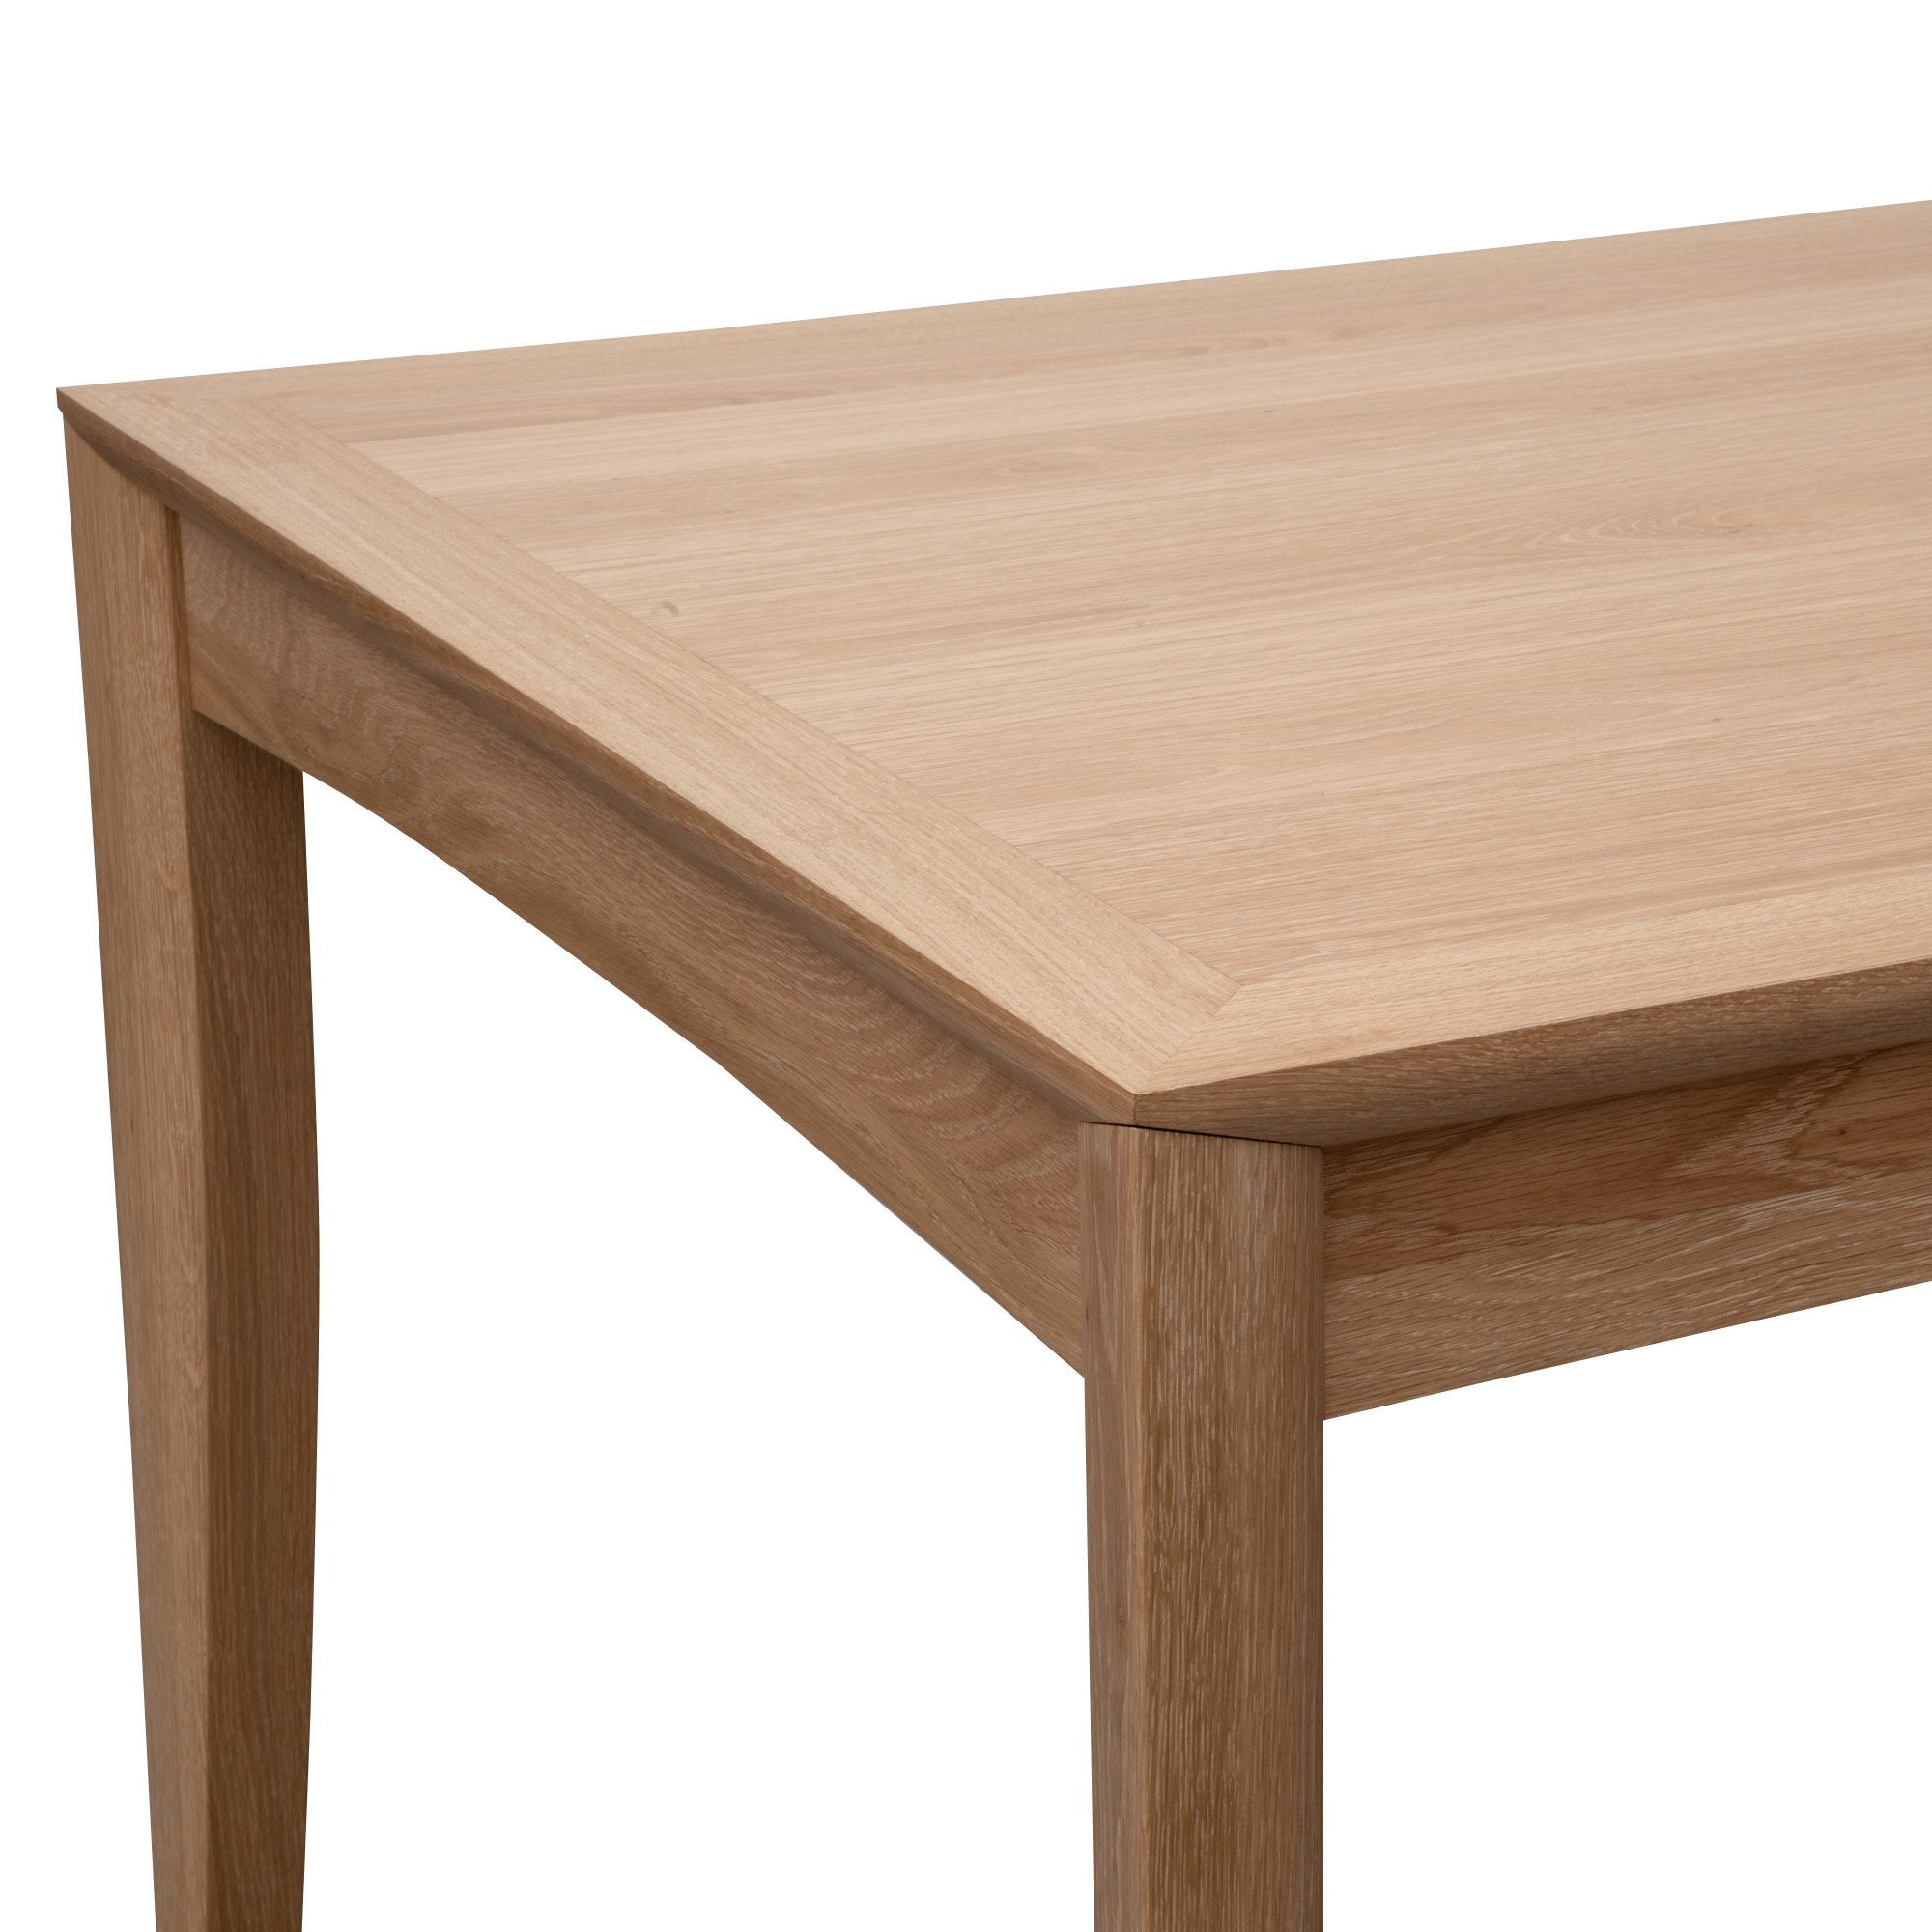 Veram Extendable Wooden Dining Table - Natural - Dining Tables